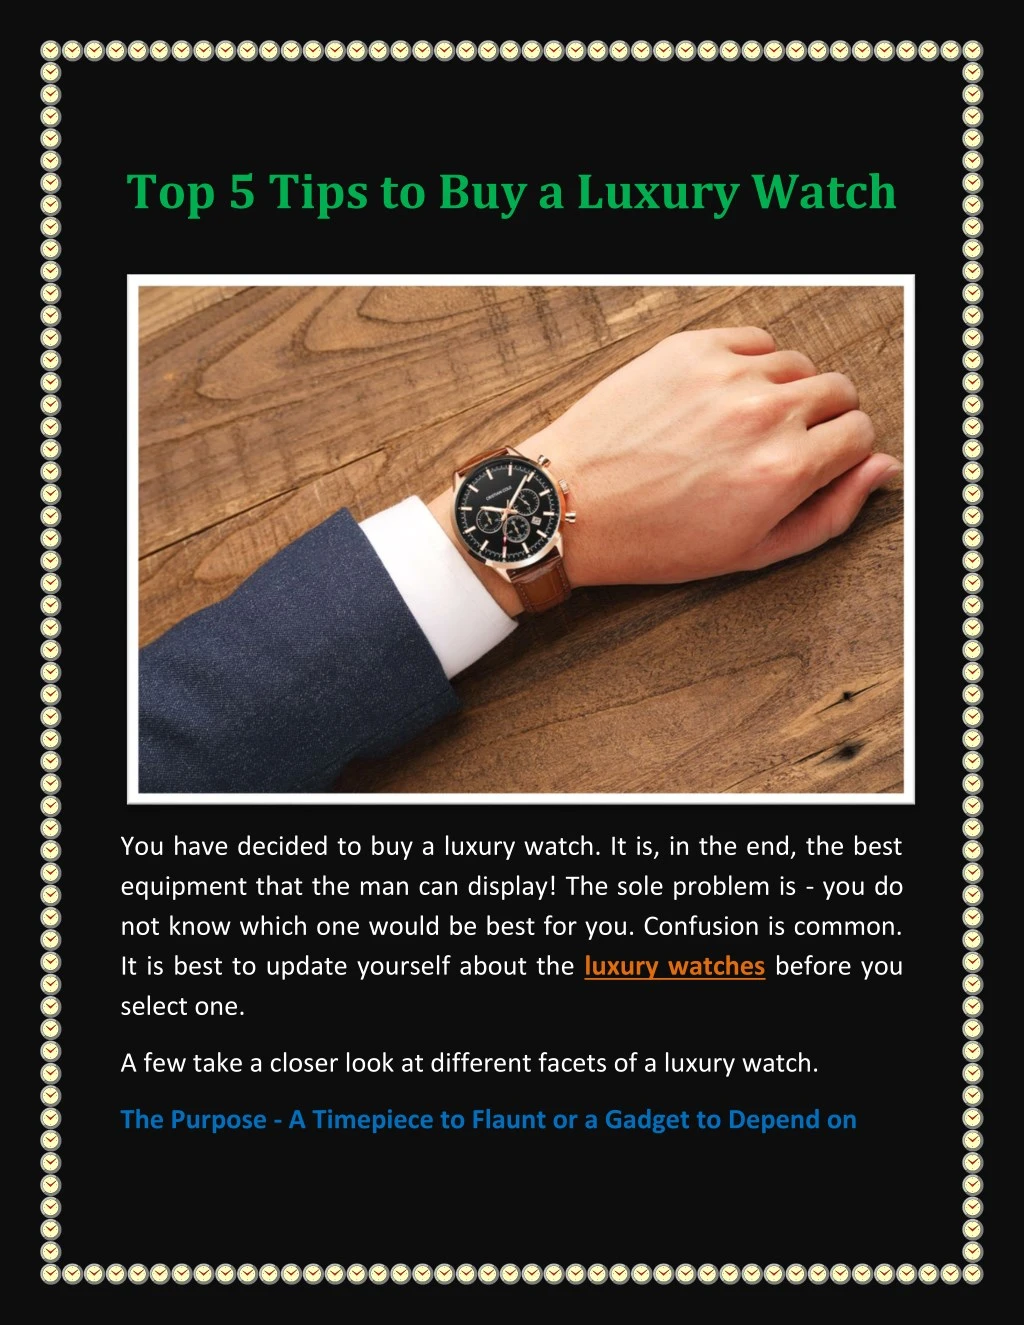 top 5 tips to buy a luxury watch